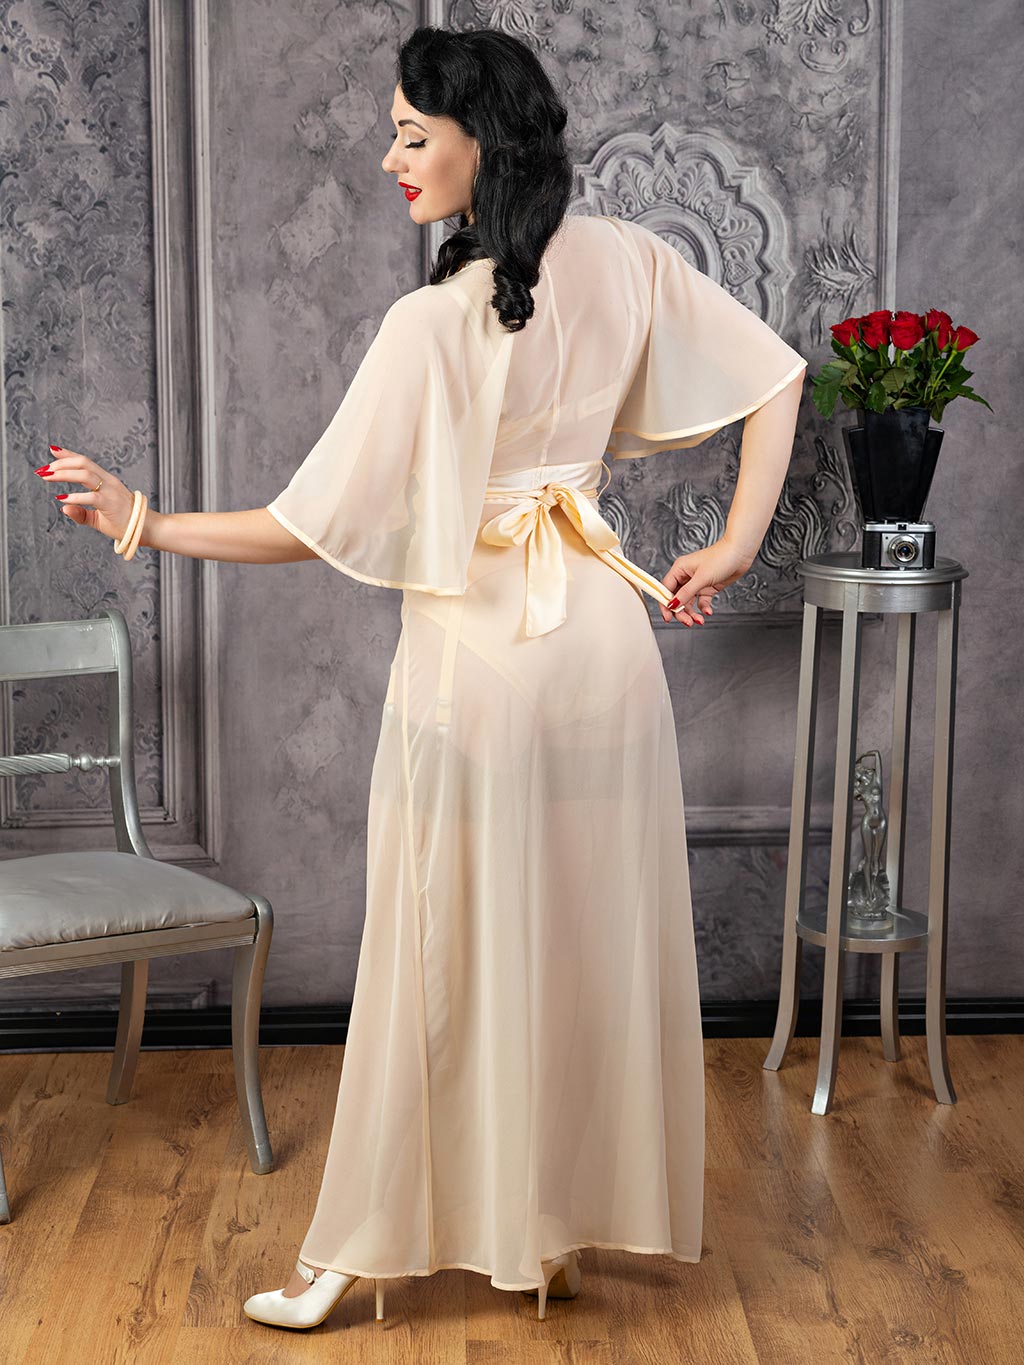 vintage full length robe in sheer peach georgette with butterfly sleeves and satin self tie belt